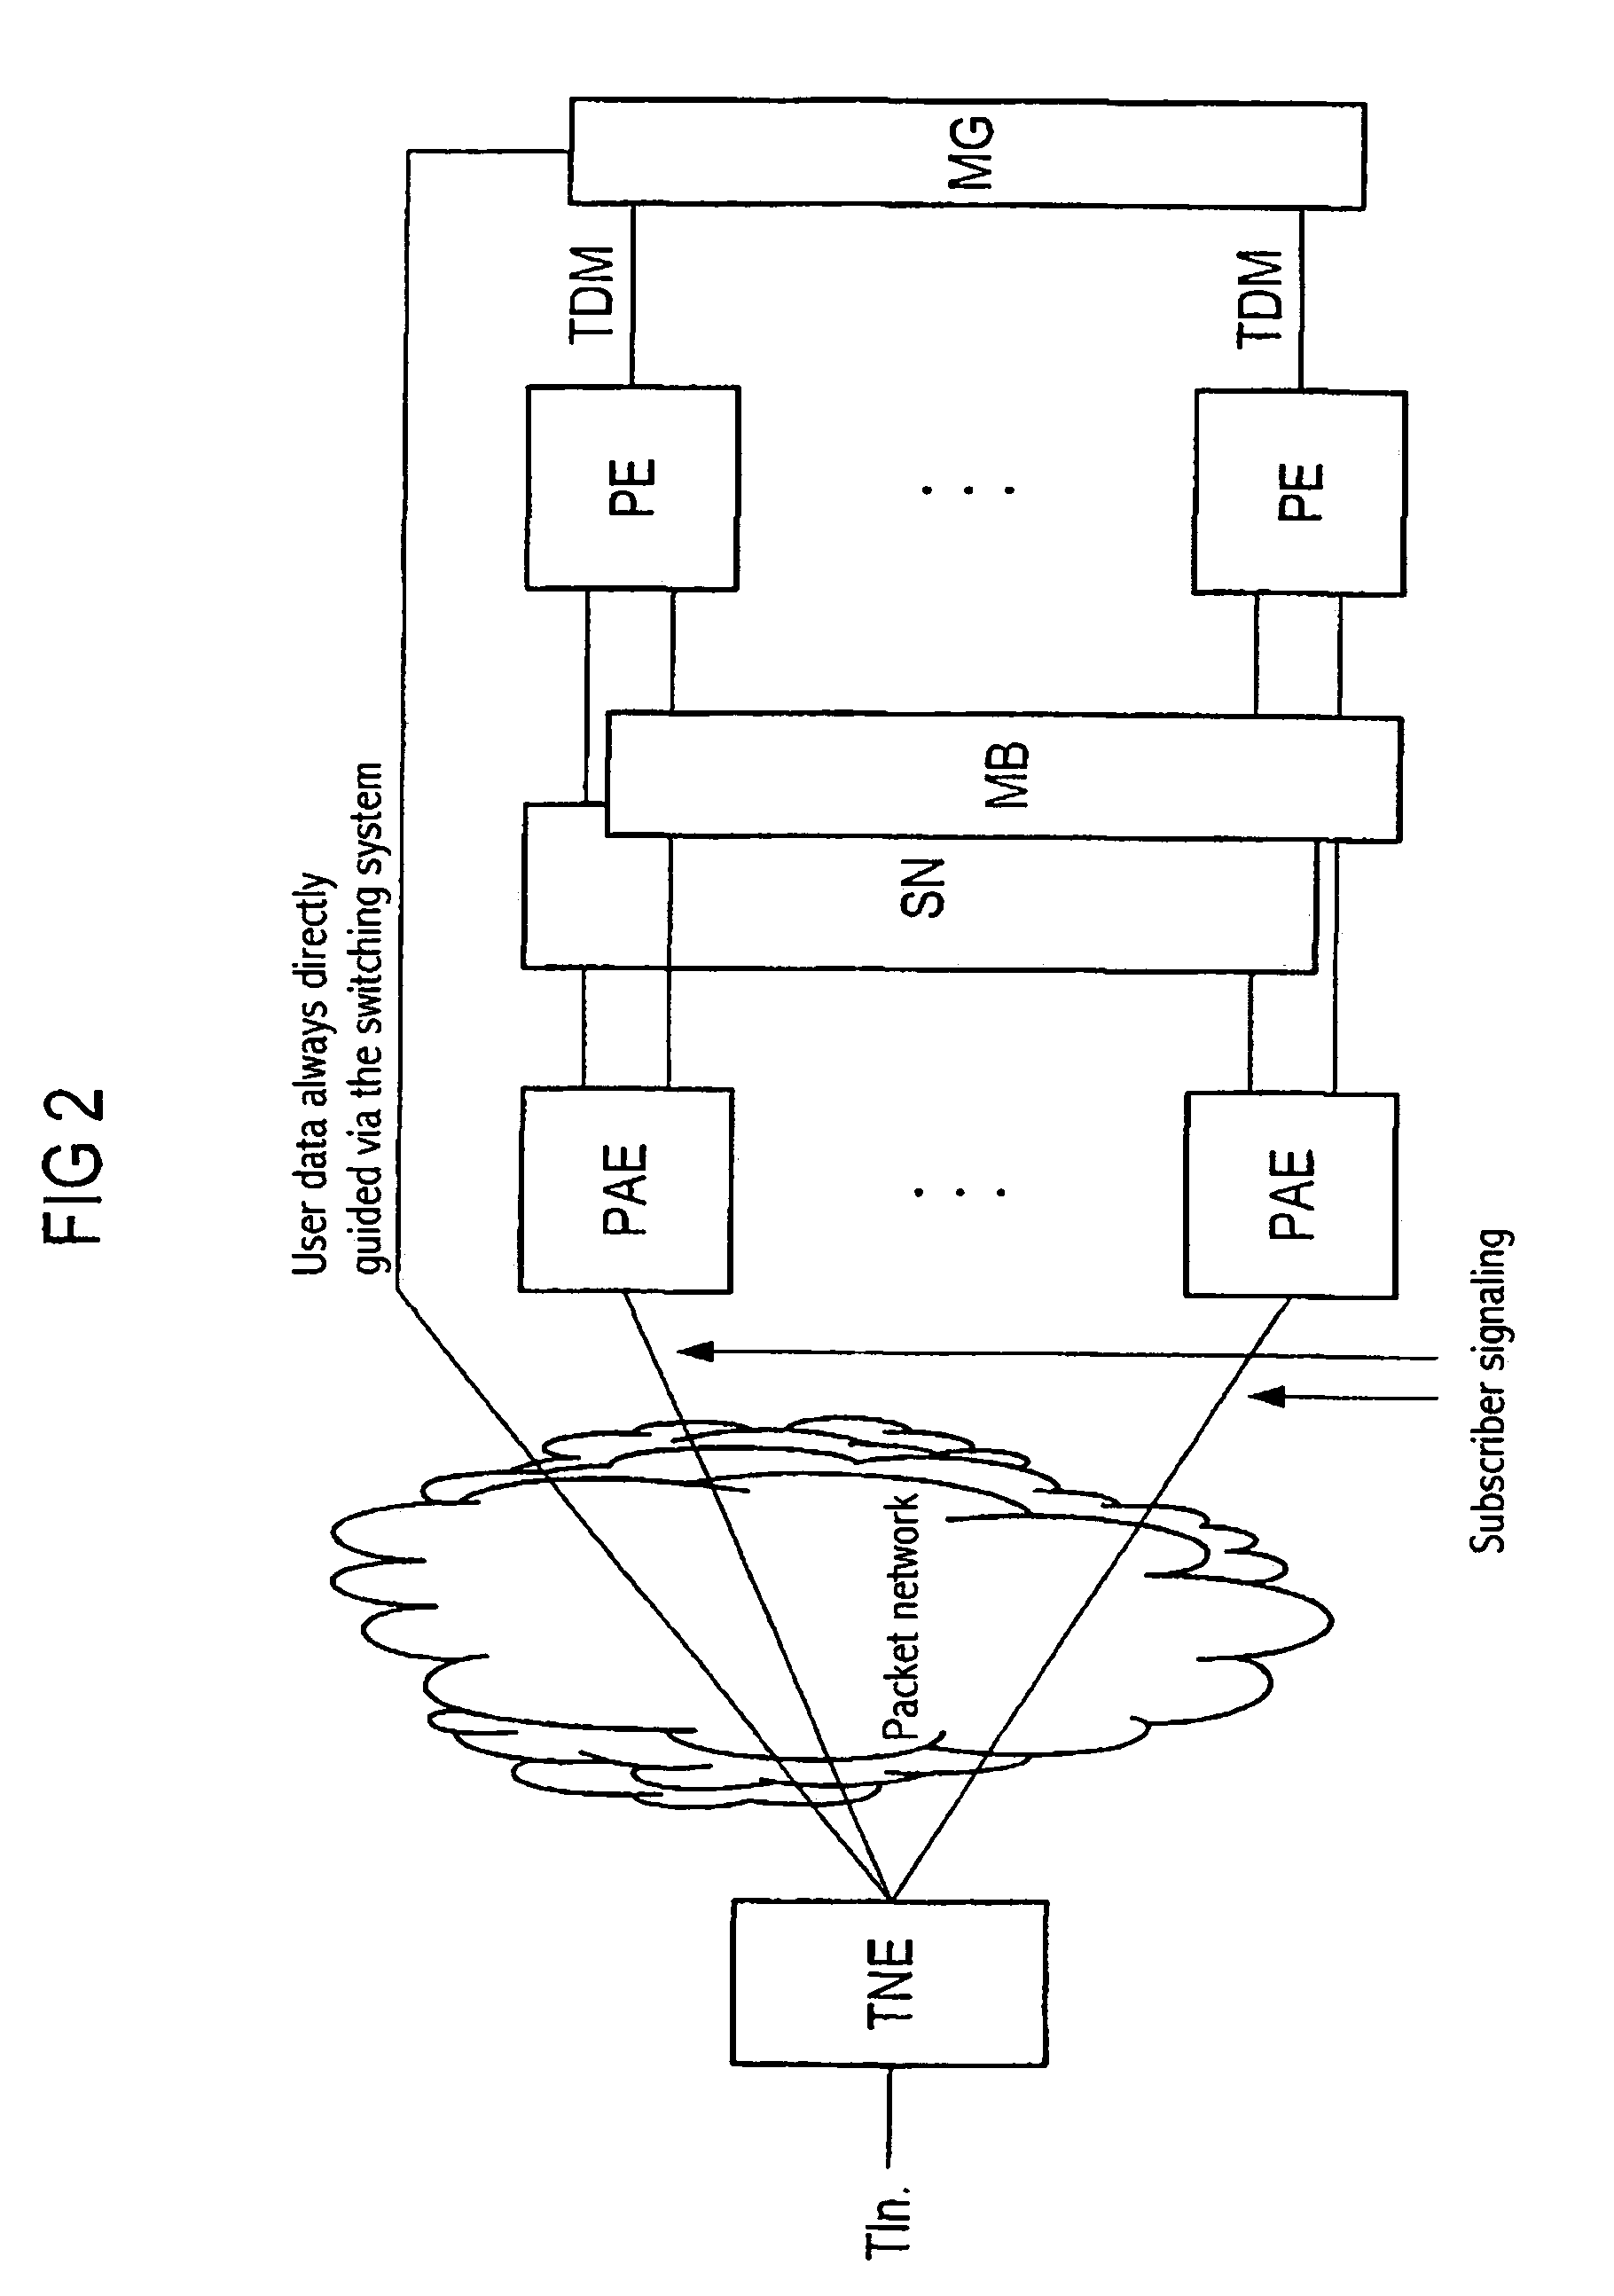 Device and method for the packet based access of classical ISDN/PSTN subscribers to a switching system